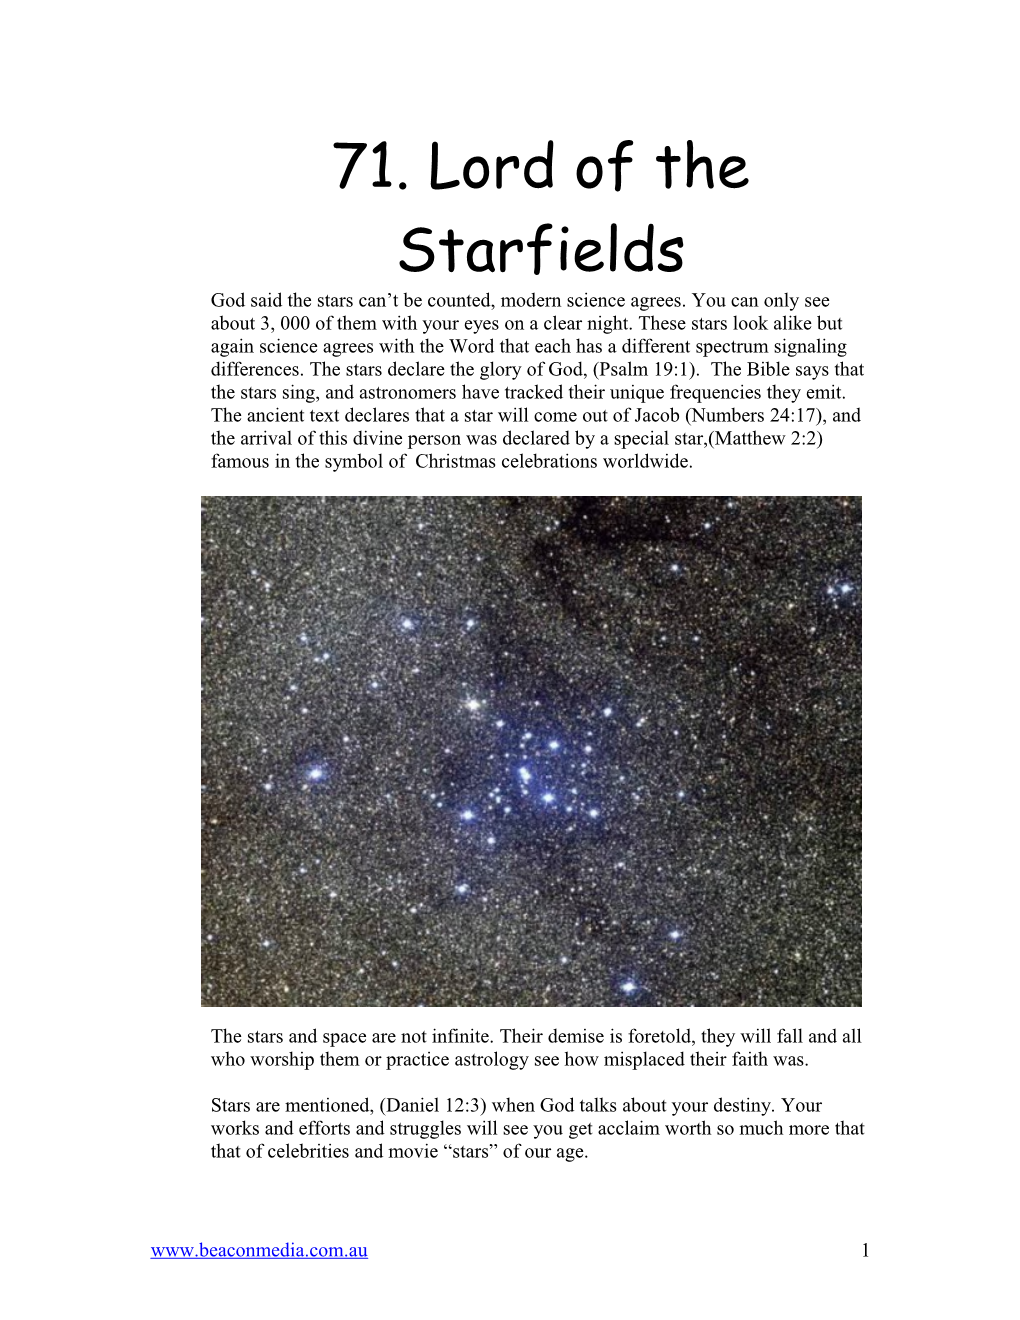 Lord of the Starfields